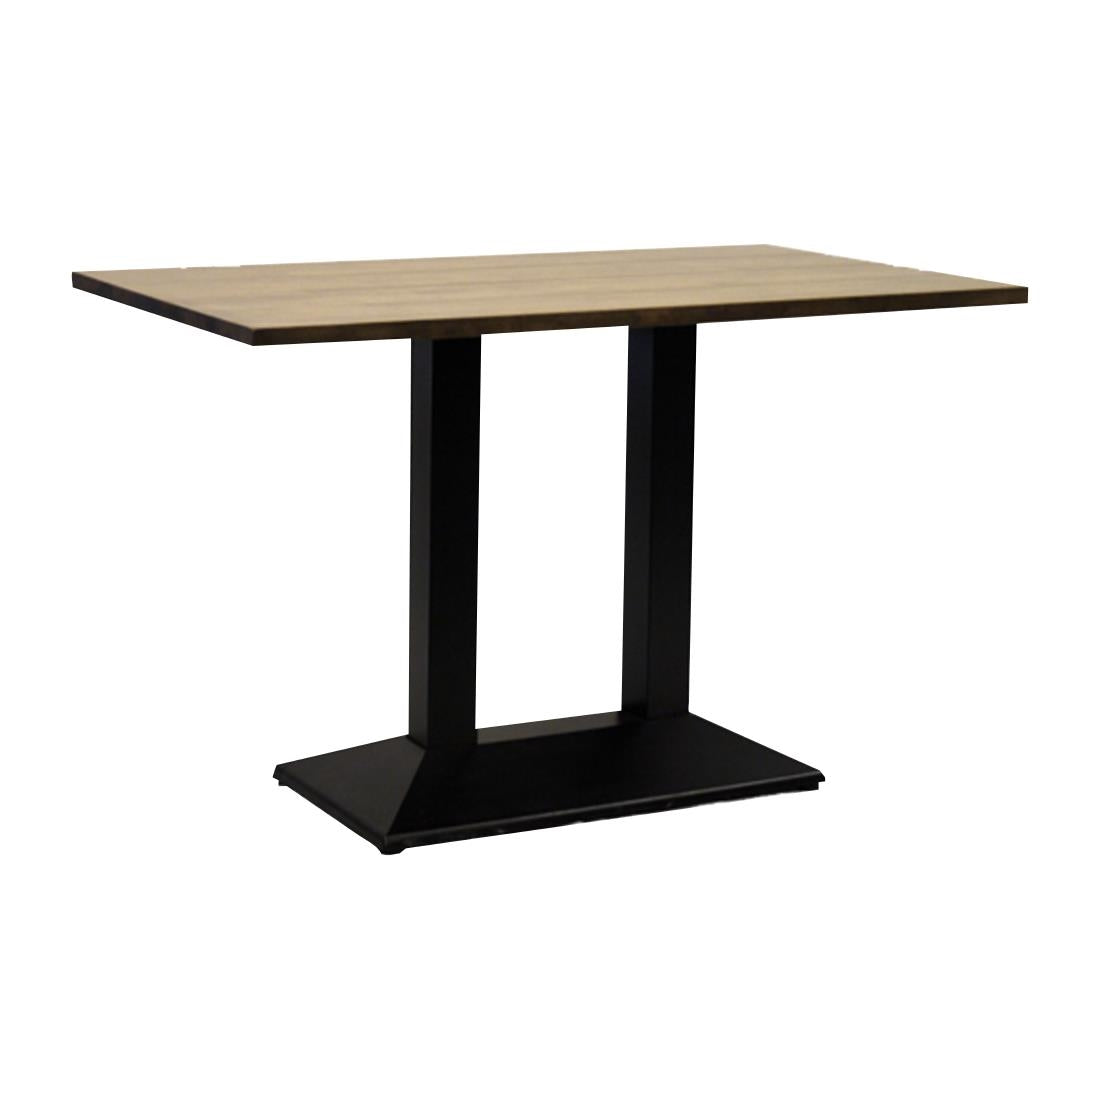 CX458 Turin Rectangular Dining Table Weathered Oak 1200x700mm JD Catering Equipment Solutions Ltd